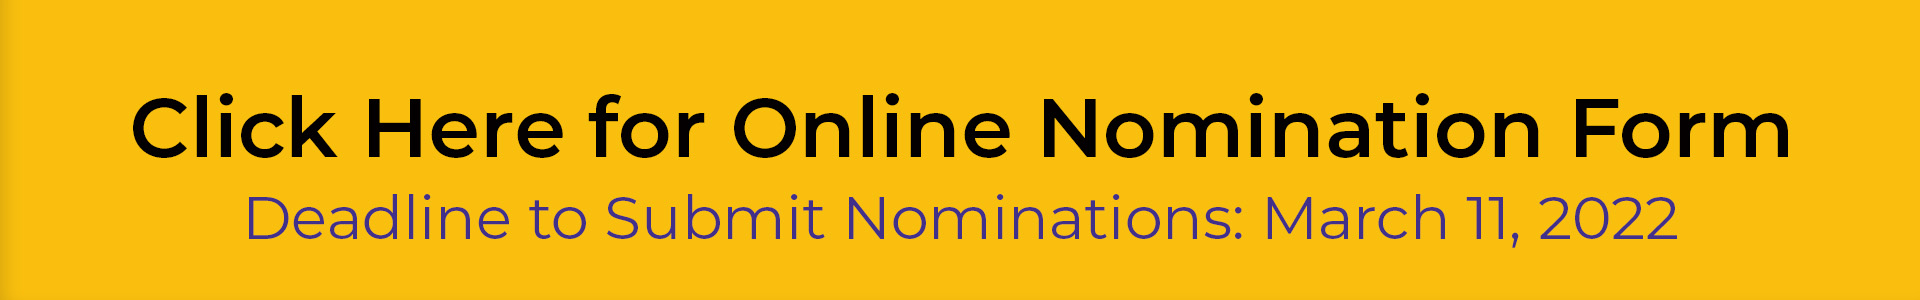 Click Here for Online Nomination Form